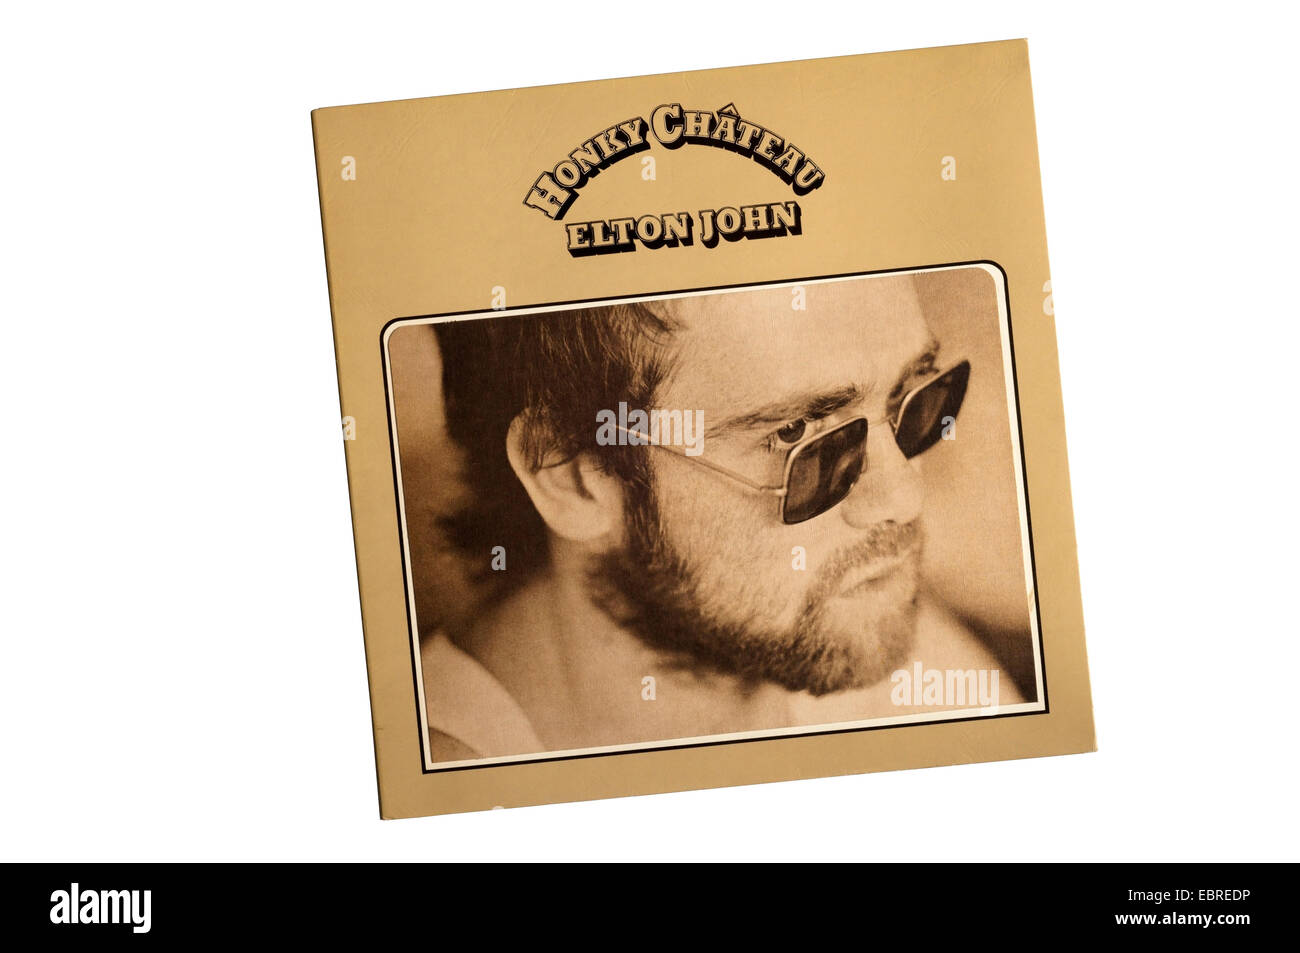 Honky Château was the 5th studio album by British singer / songwriter Elton John, released in 1972. Stock Photo